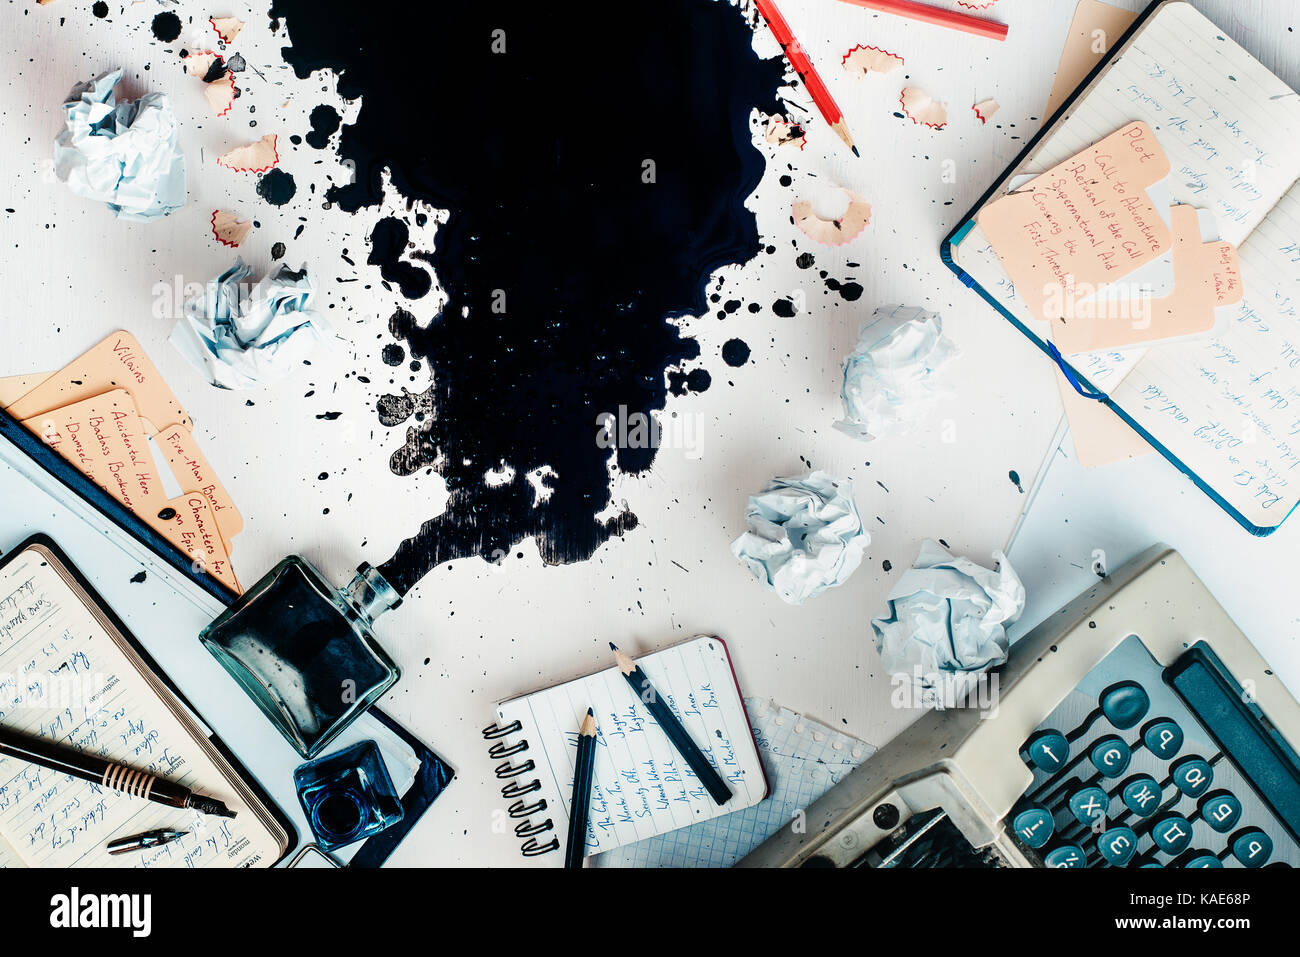 Writer workplace with spilled ink, stationery and a typewriter. Crumpled paper balls with pencils on a white wooden background, creative writing conce Stock Photo